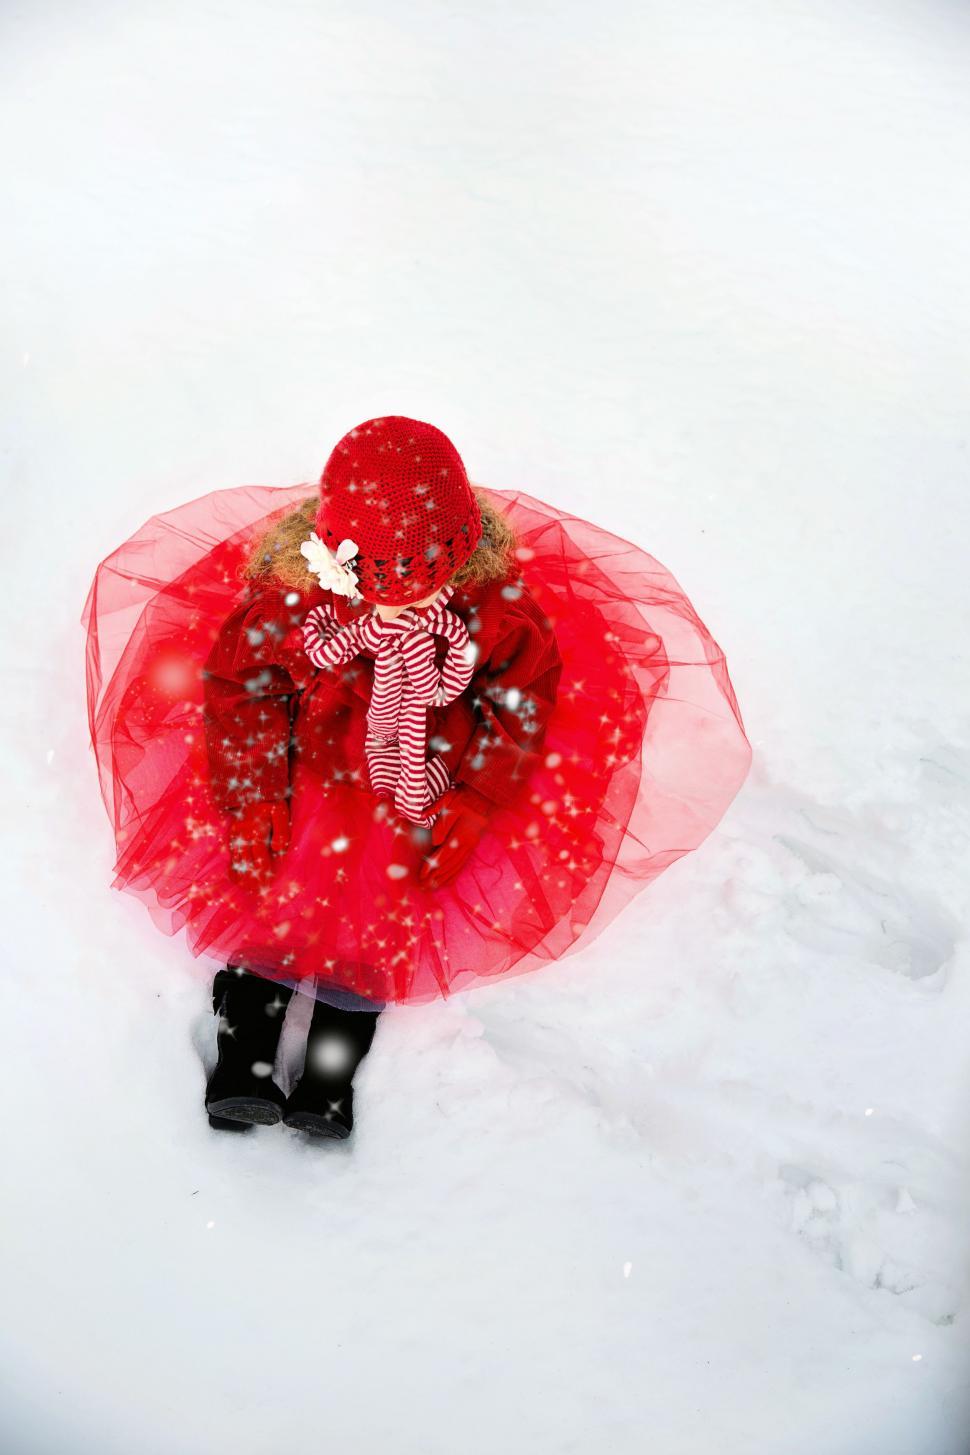 Free Image of Little Girl in red dress in snow  